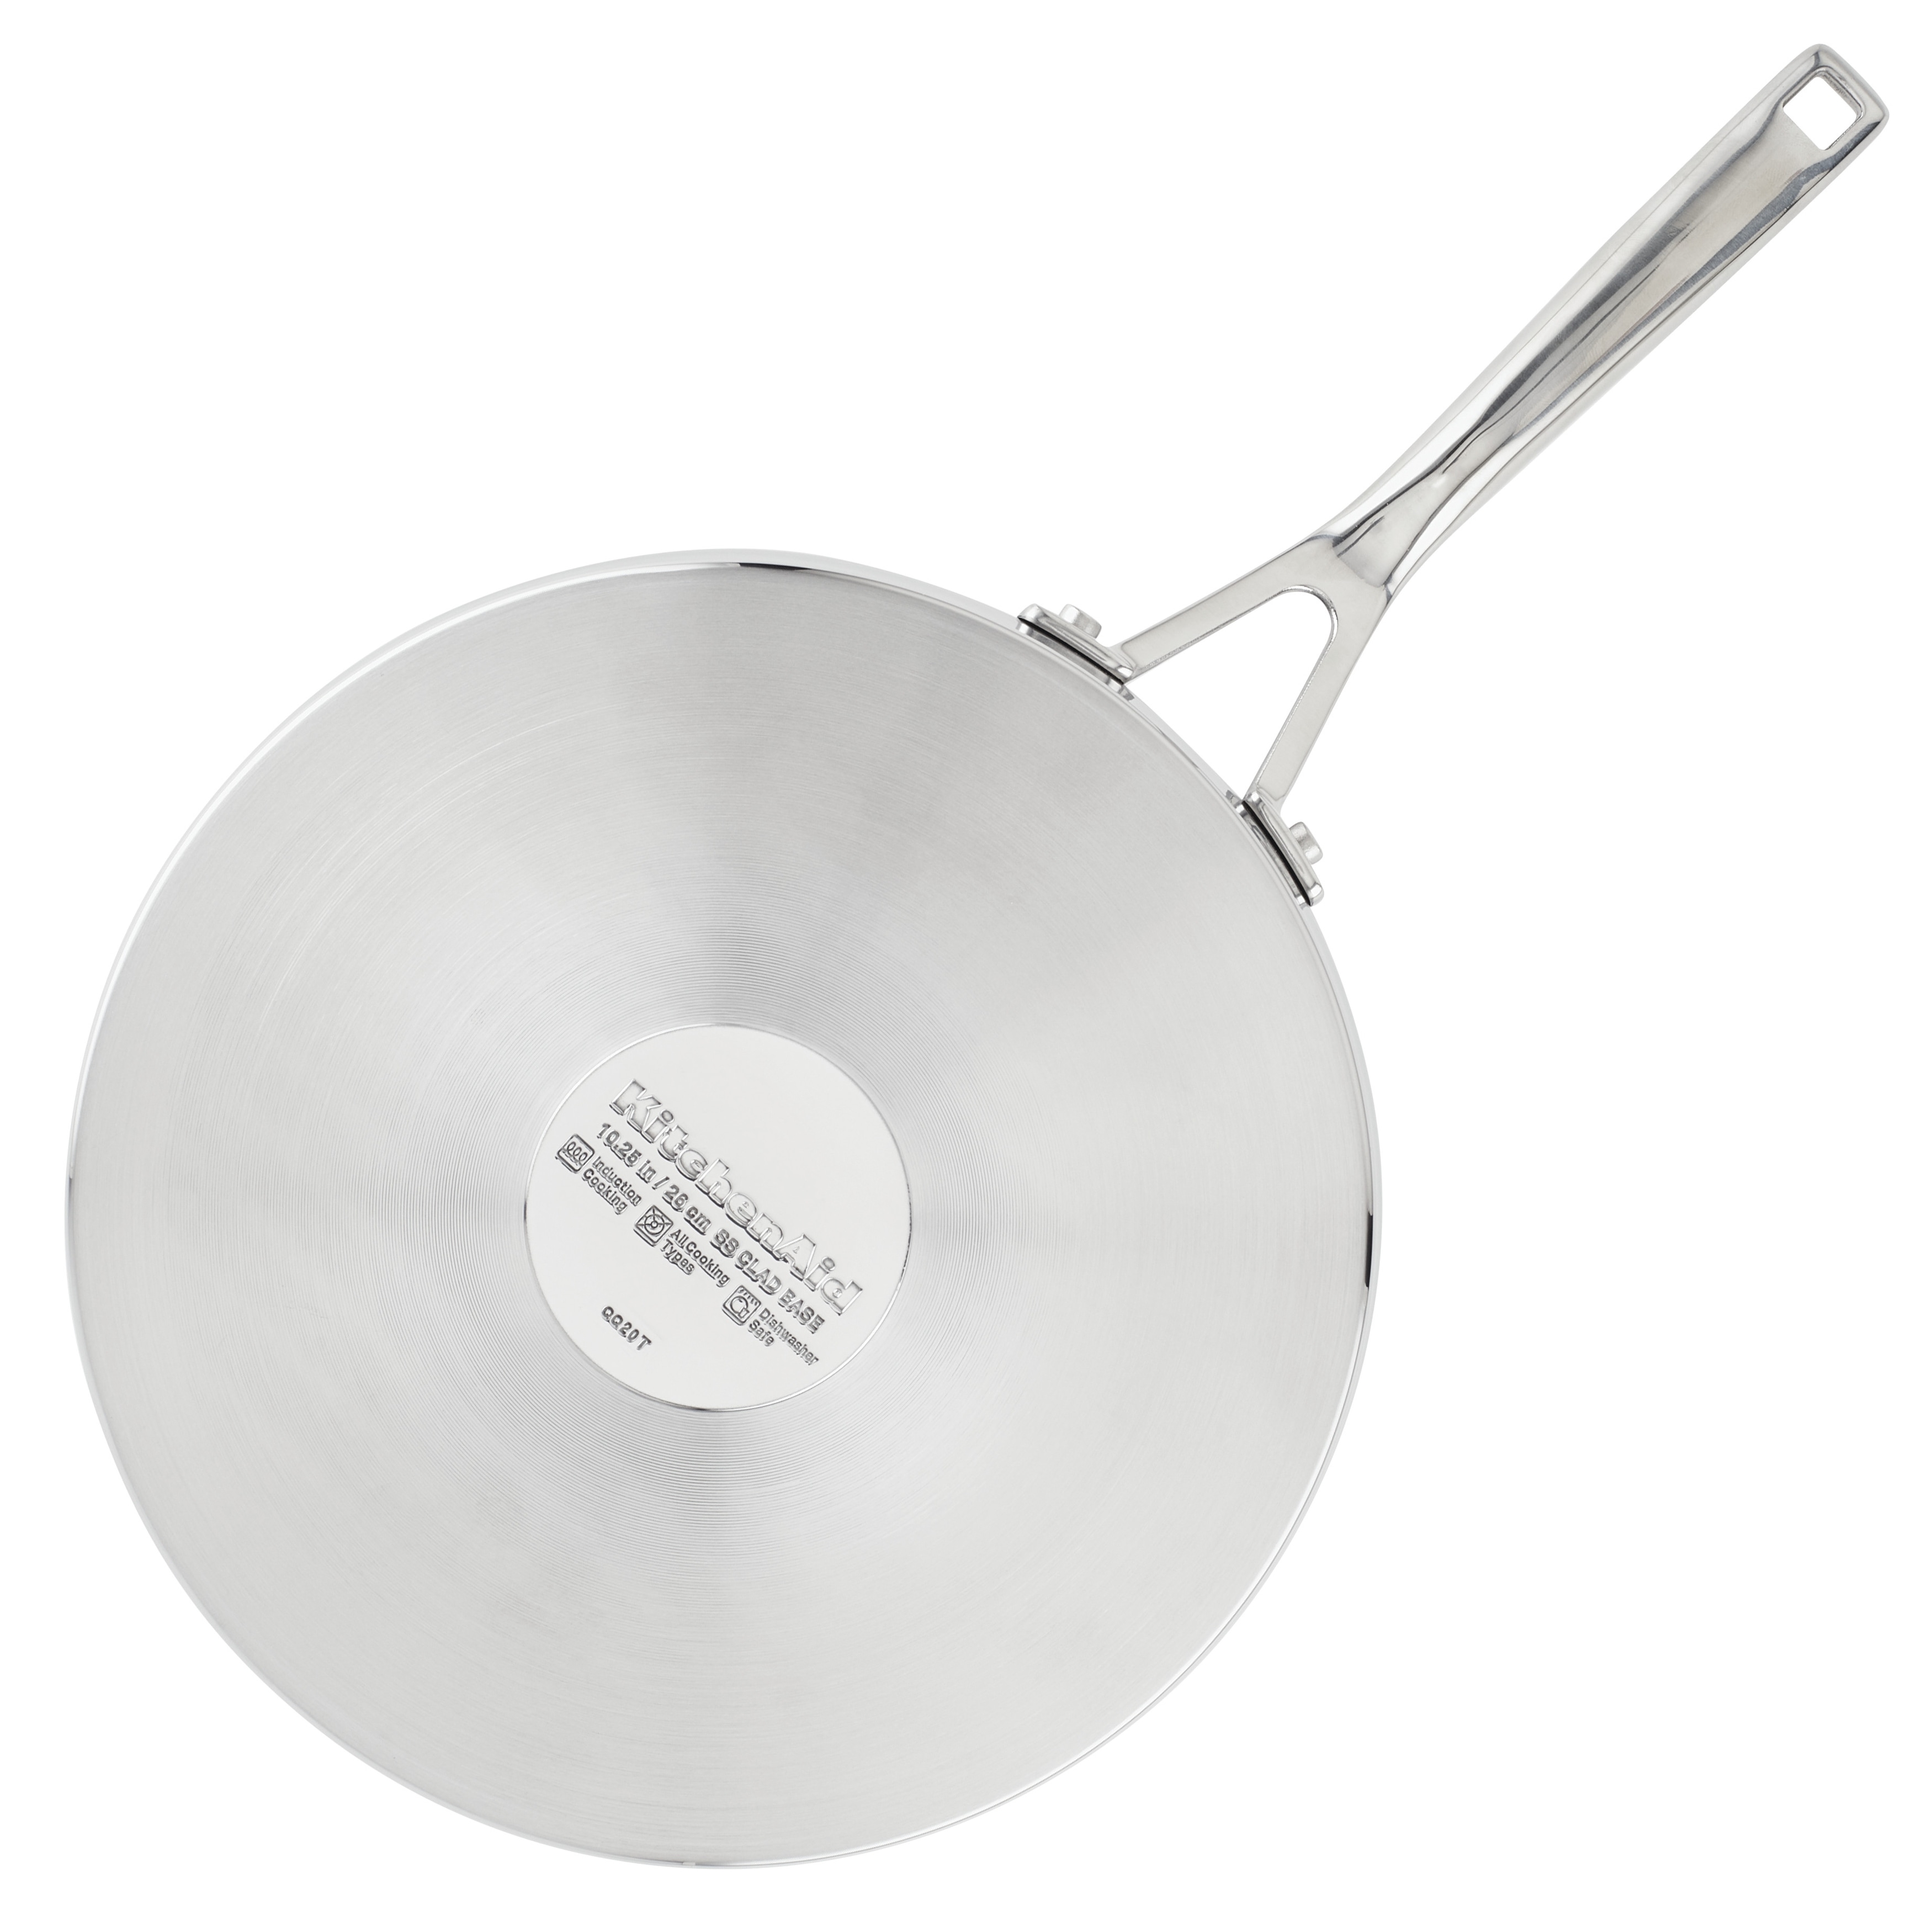 KitchenAid Stainless Steel Nonstick Frying Pan/Skillet, 8 Inch, Brushed  Stainless Steel